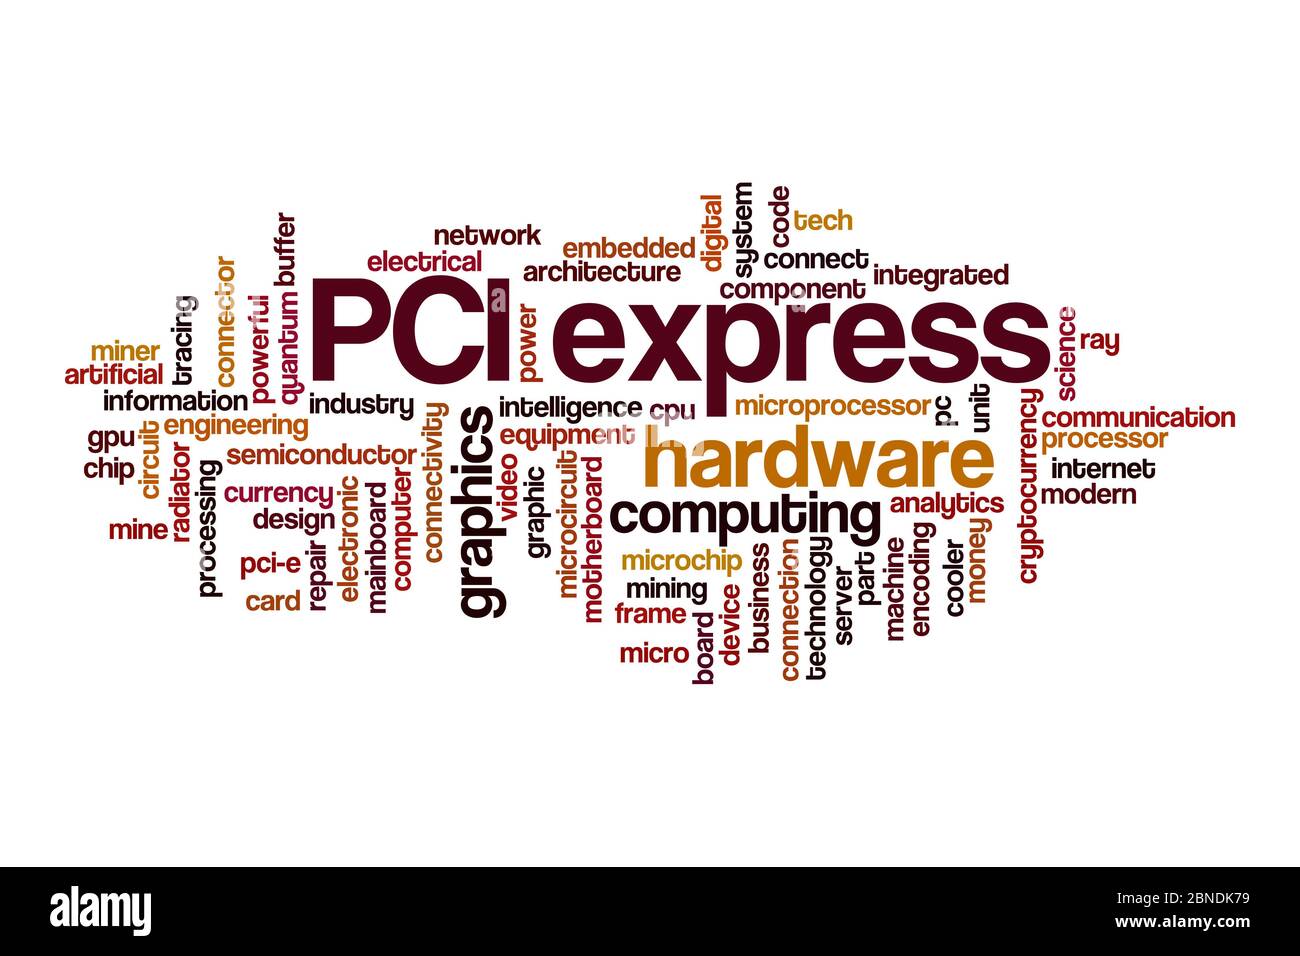 PCI express cloud concept on white background Stock Photo